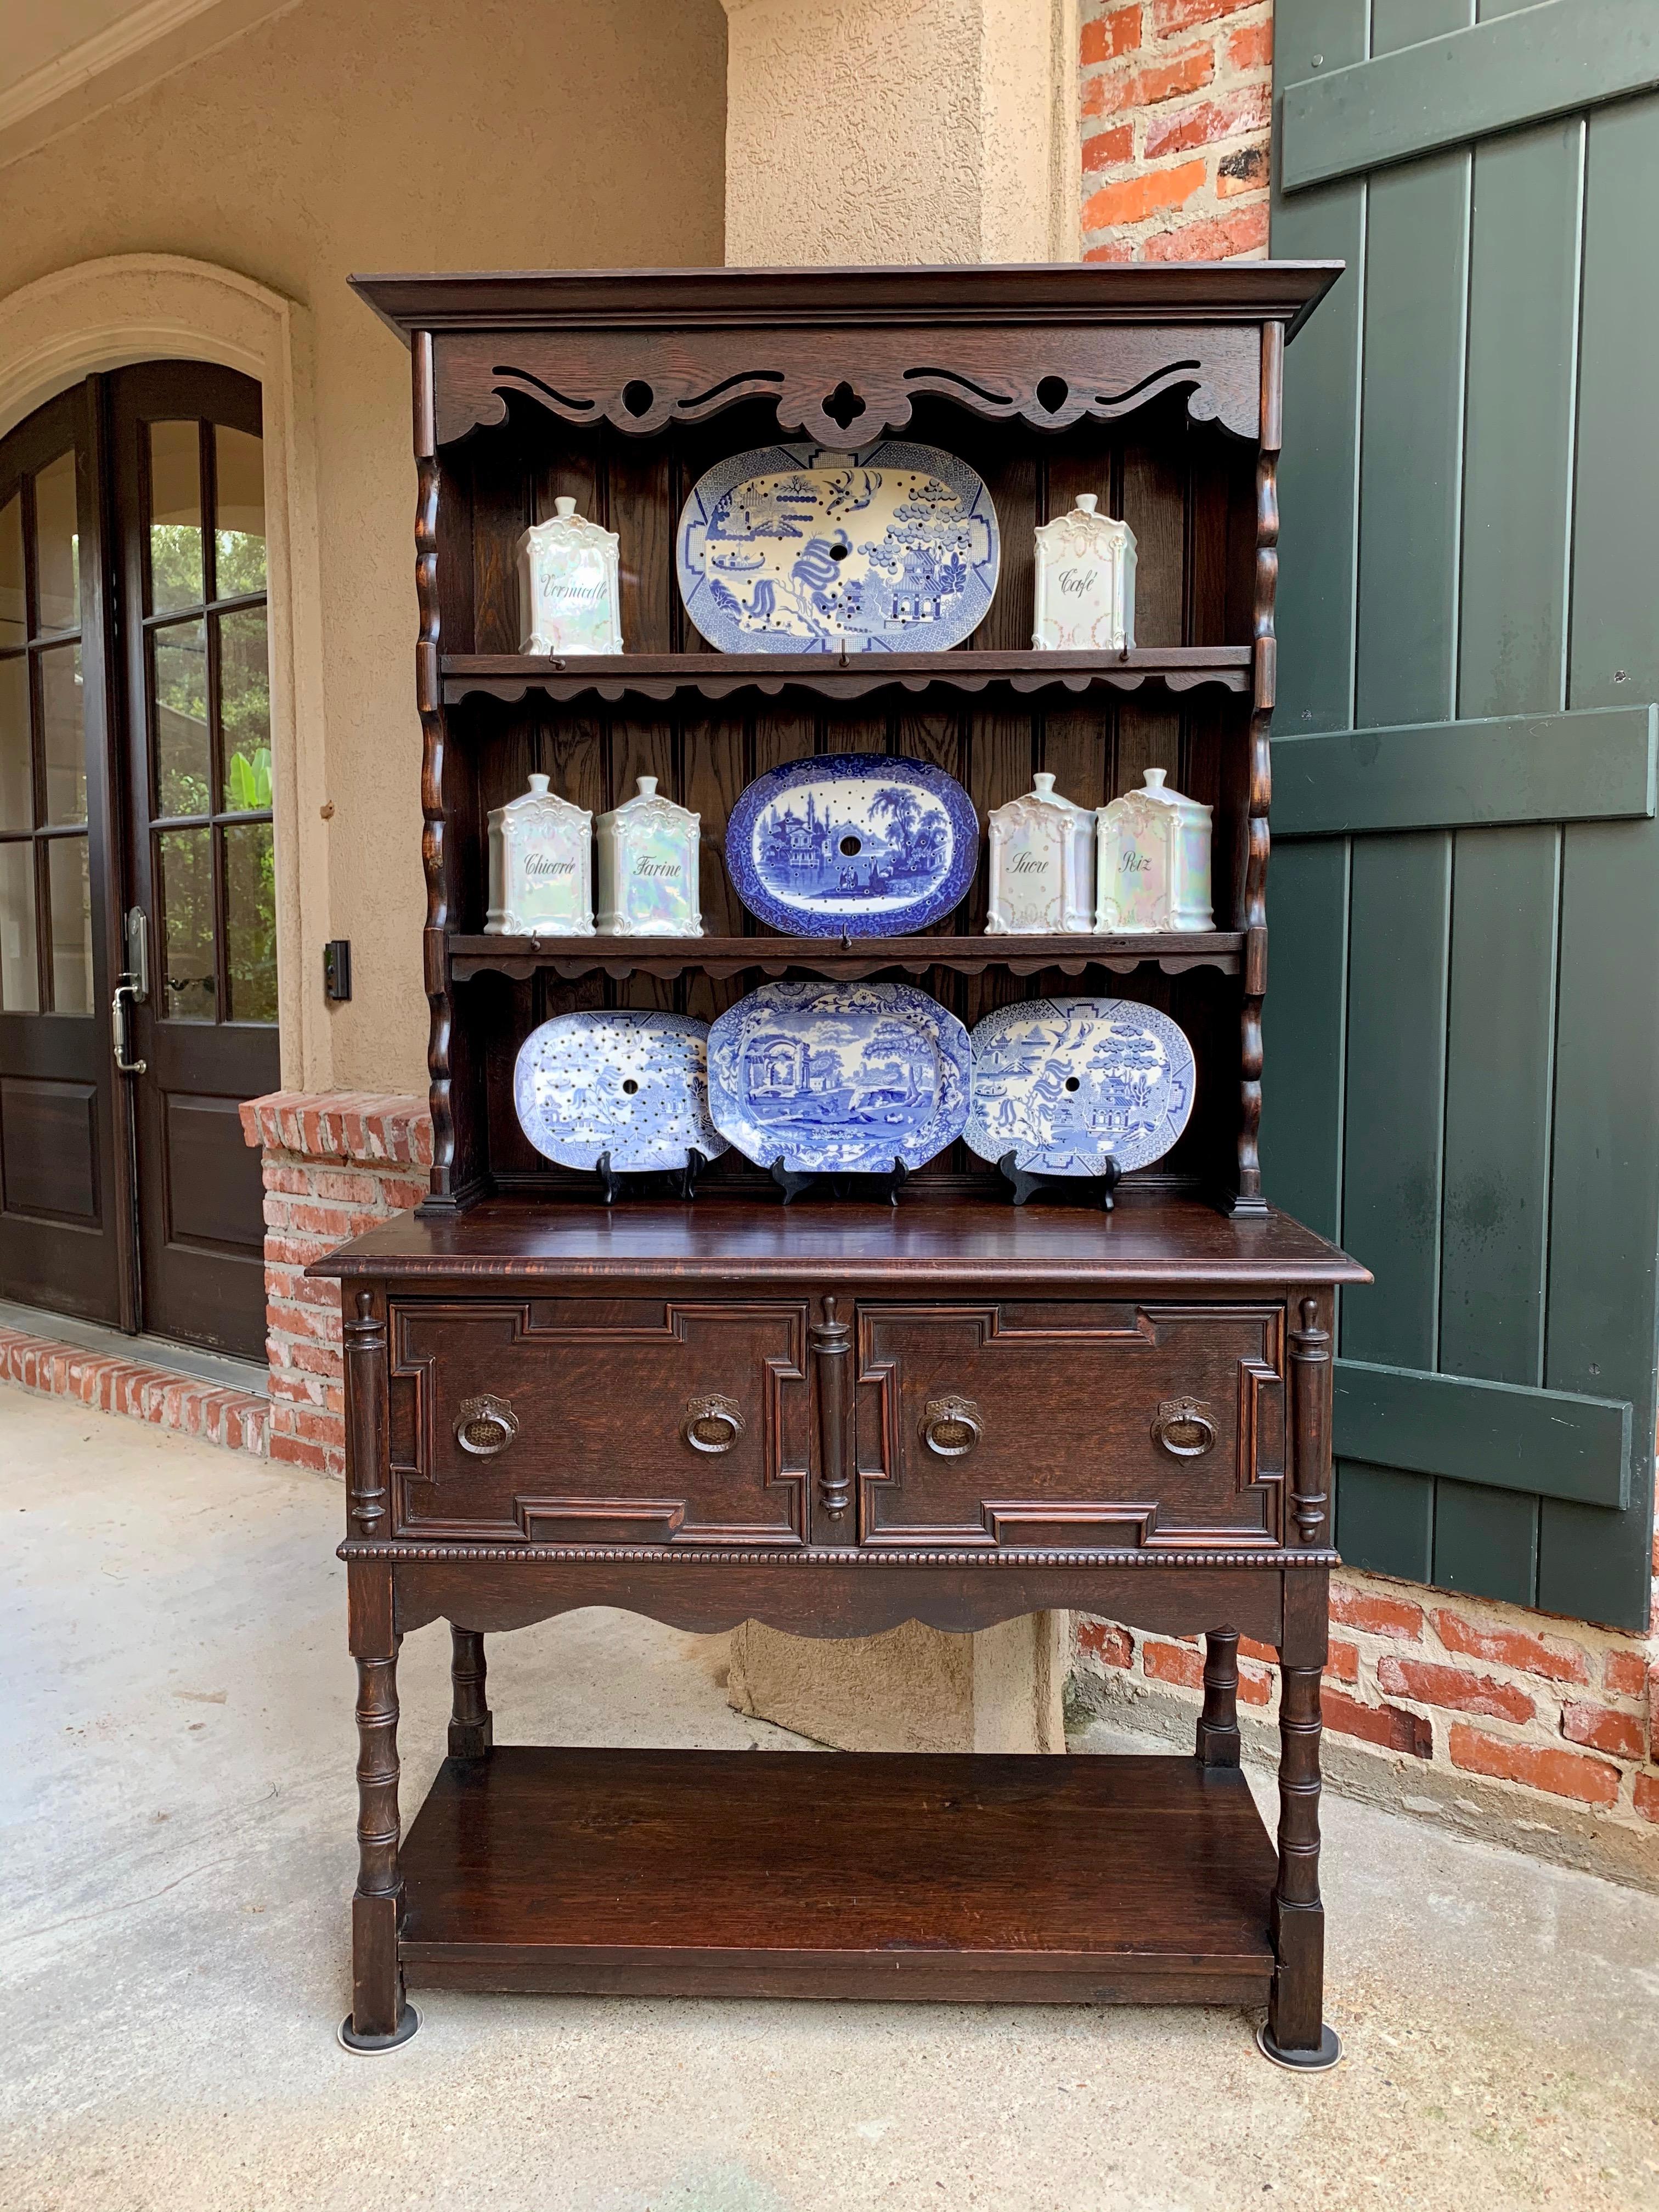 ~Direct from England~
Always a classic, this proper antique English “welsh dresser” or sideboard blends perfectly with every style, and provides an abundance of display and storage area.
The smaller size makes it suitable for a variety of places